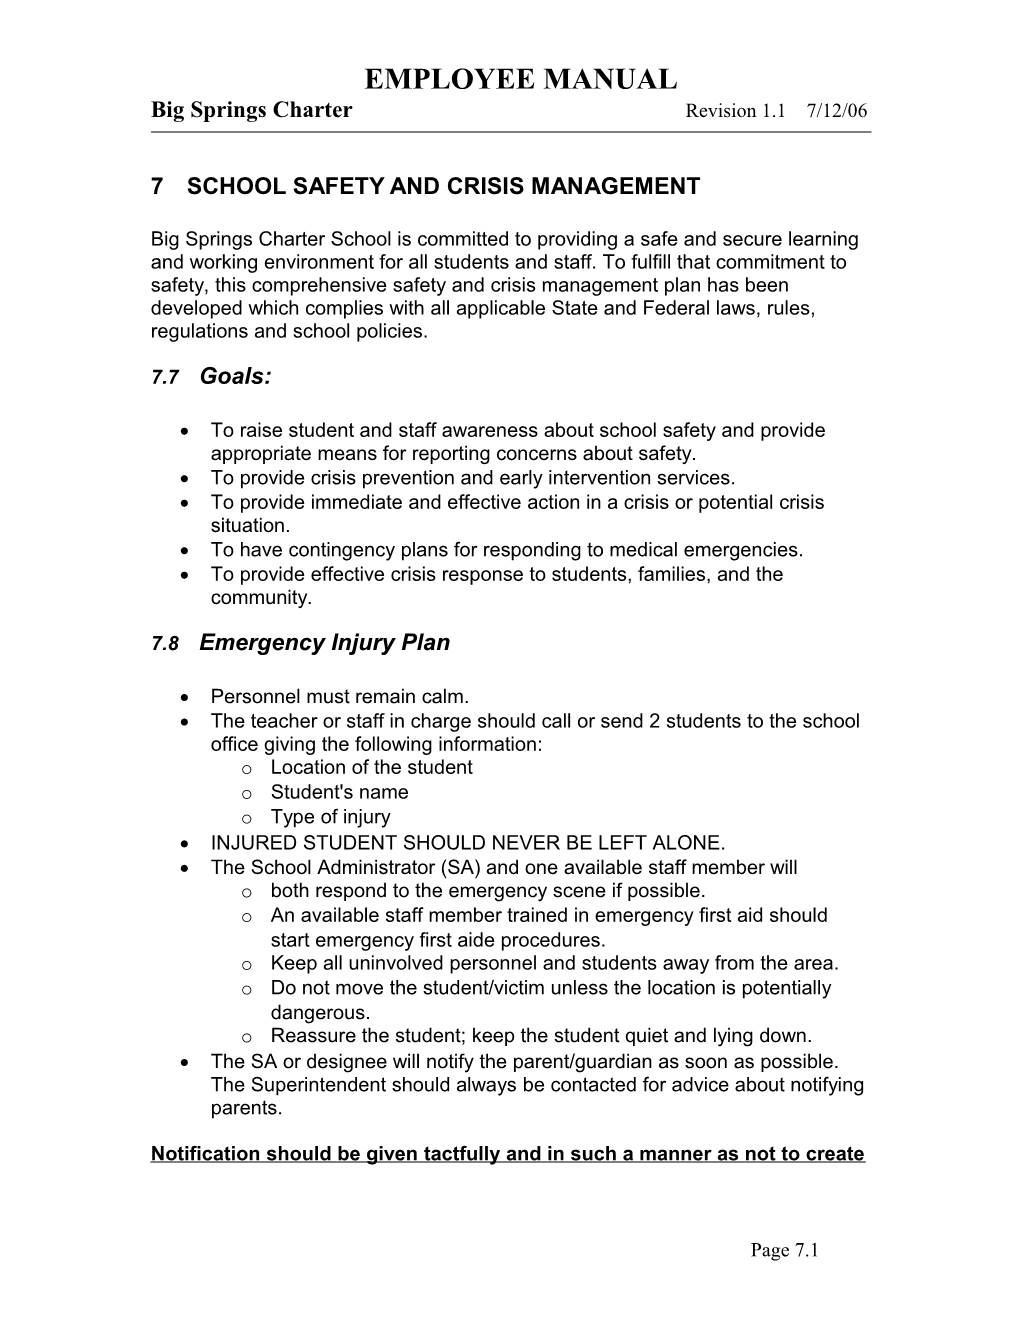 School Safety and Crisis Management